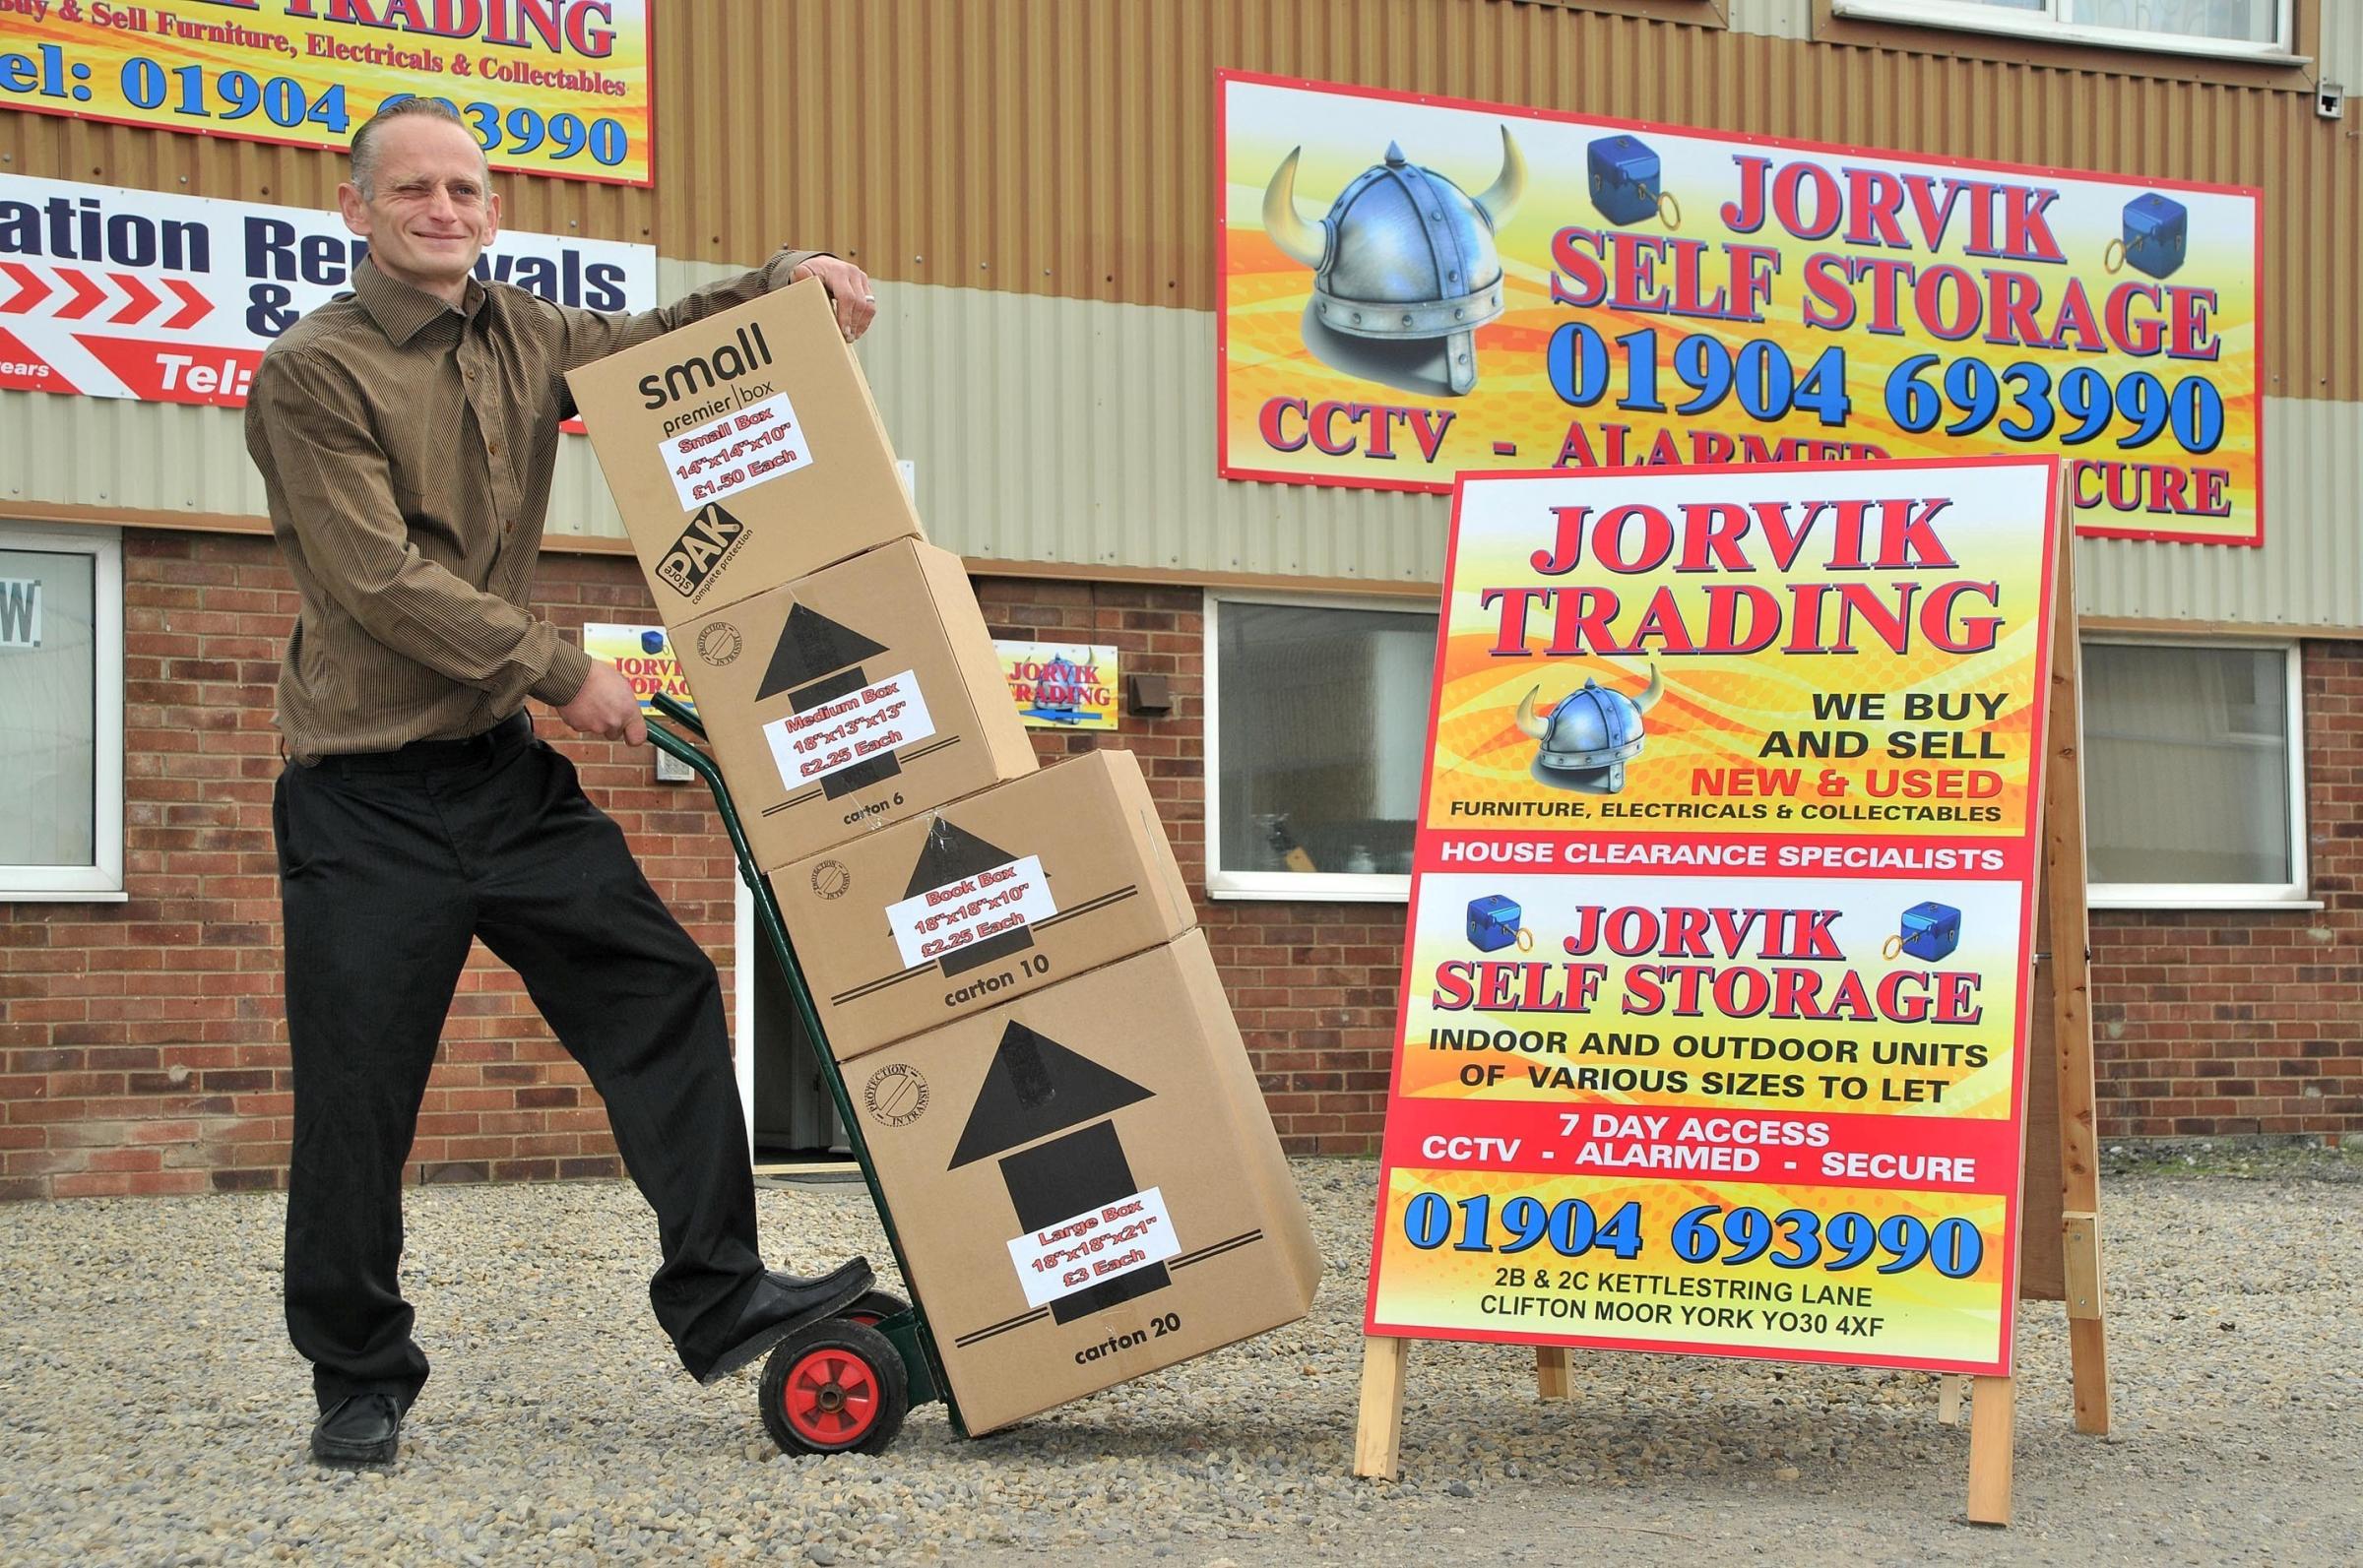 Jorvik Removals boss appeals to get driving ban reduced